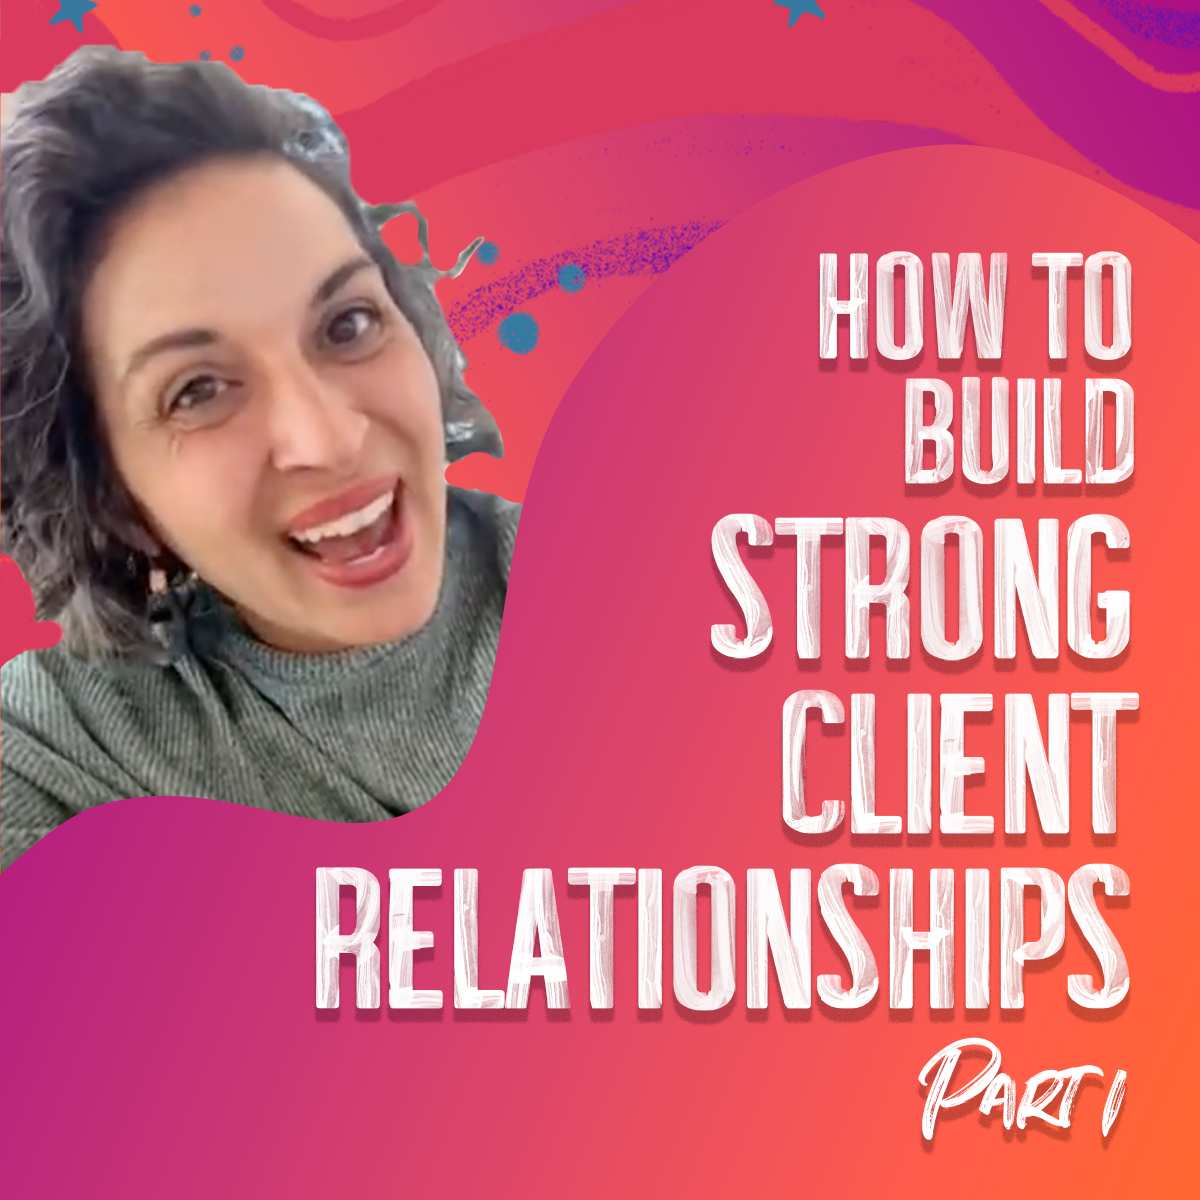 How to Build Strong Client Relationships – Part 1